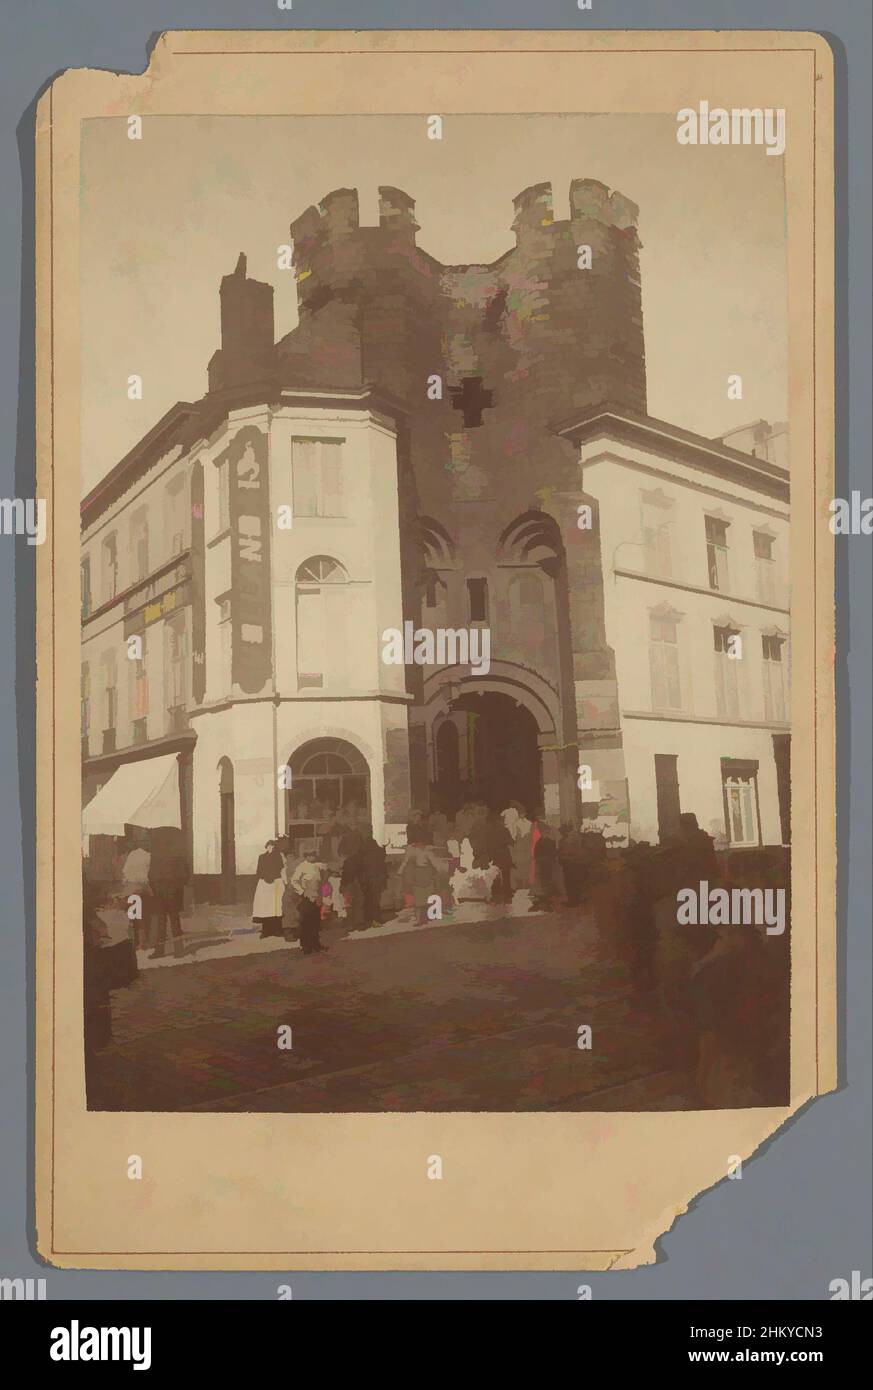 Art inspired by View of the gate of the Castle of the Counts in Ghent, Le chateau des comtes, Gand, 1850 - 1900, photographic support, cardboard, albumen print, height 166 mm × width 107 mm, Classic works modernized by Artotop with a splash of modernity. Shapes, color and value, eye-catching visual impact on art. Emotions through freedom of artworks in a contemporary way. A timeless message pursuing a wildly creative new direction. Artists turning to the digital medium and creating the Artotop NFT Stock Photo